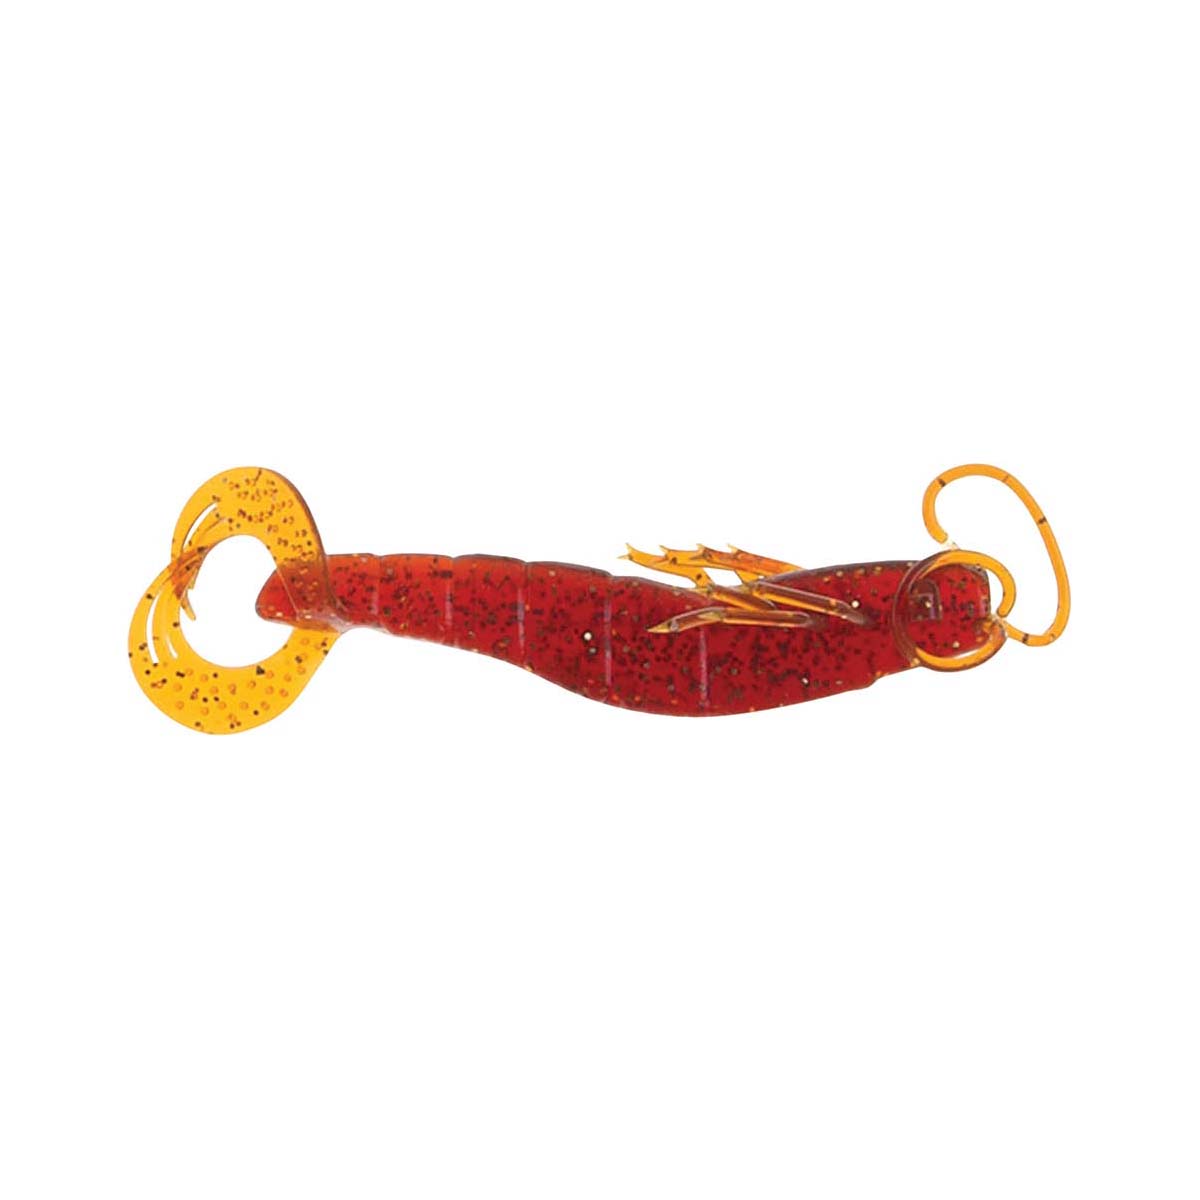 Atomic Plazos Prong Soft Plastic Lure 3in Motor Oil Gold